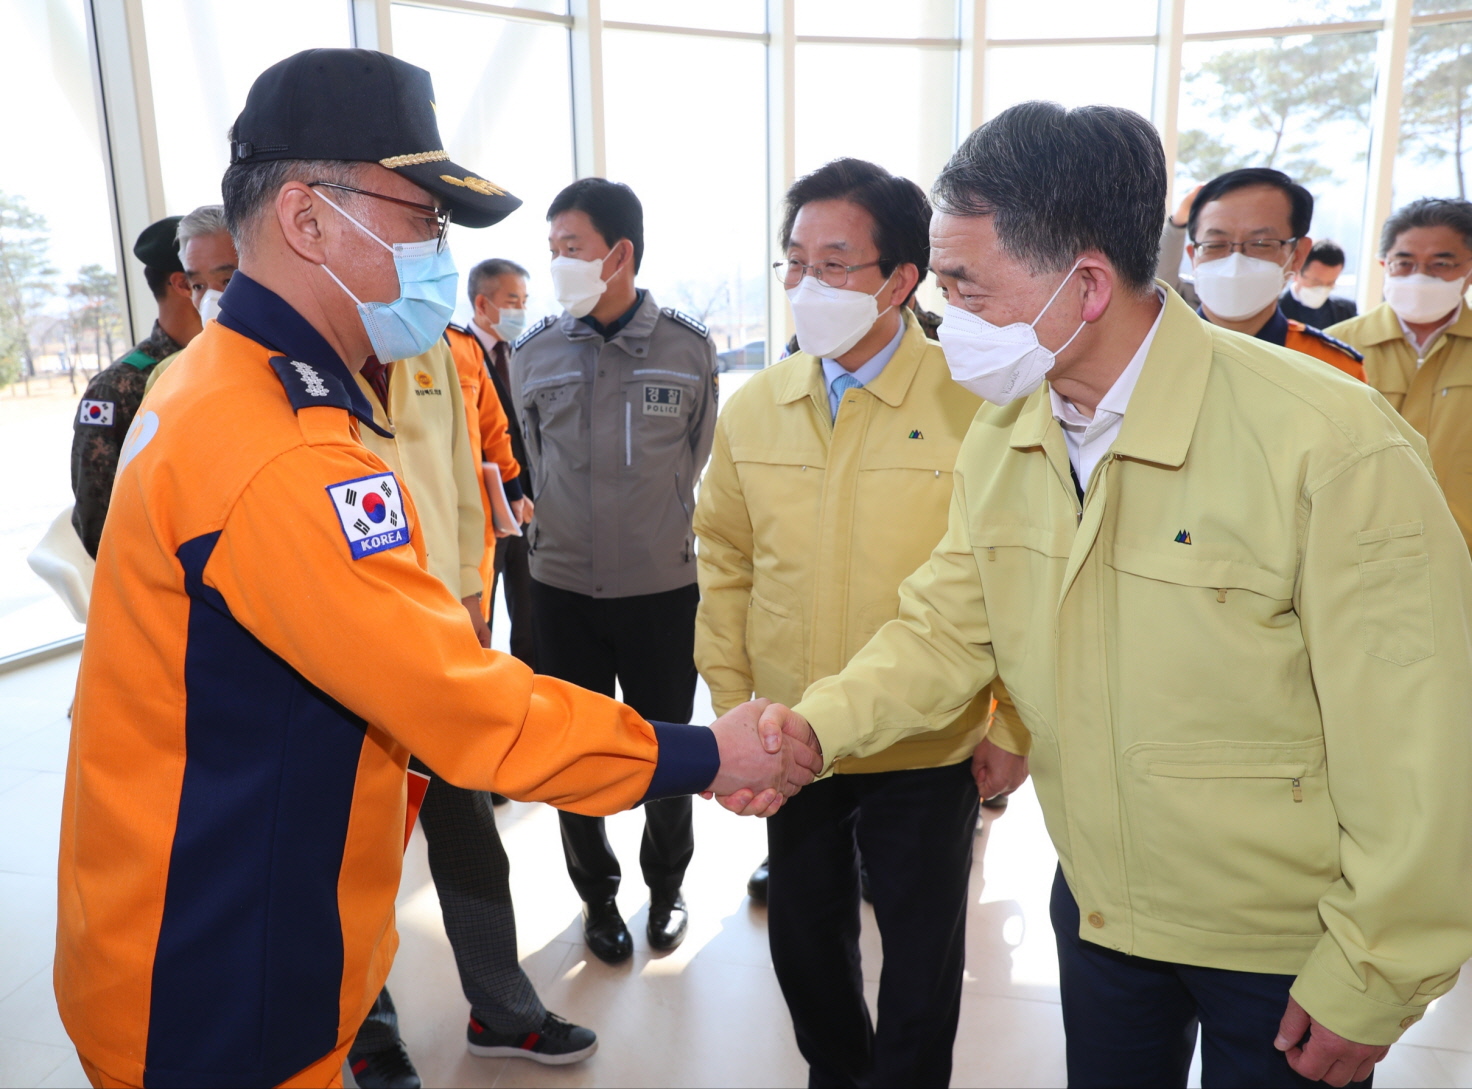 Park Neung-hoo, Vice Head 1 of the Central Disaster and Safety Countermeasures Headquarters, Attends the Opening Ceremony of the Gyeongbuk Daegu 3 Community Treatment Center (Mun-gyeong Seoul National University Hospital Training Center) 사진2